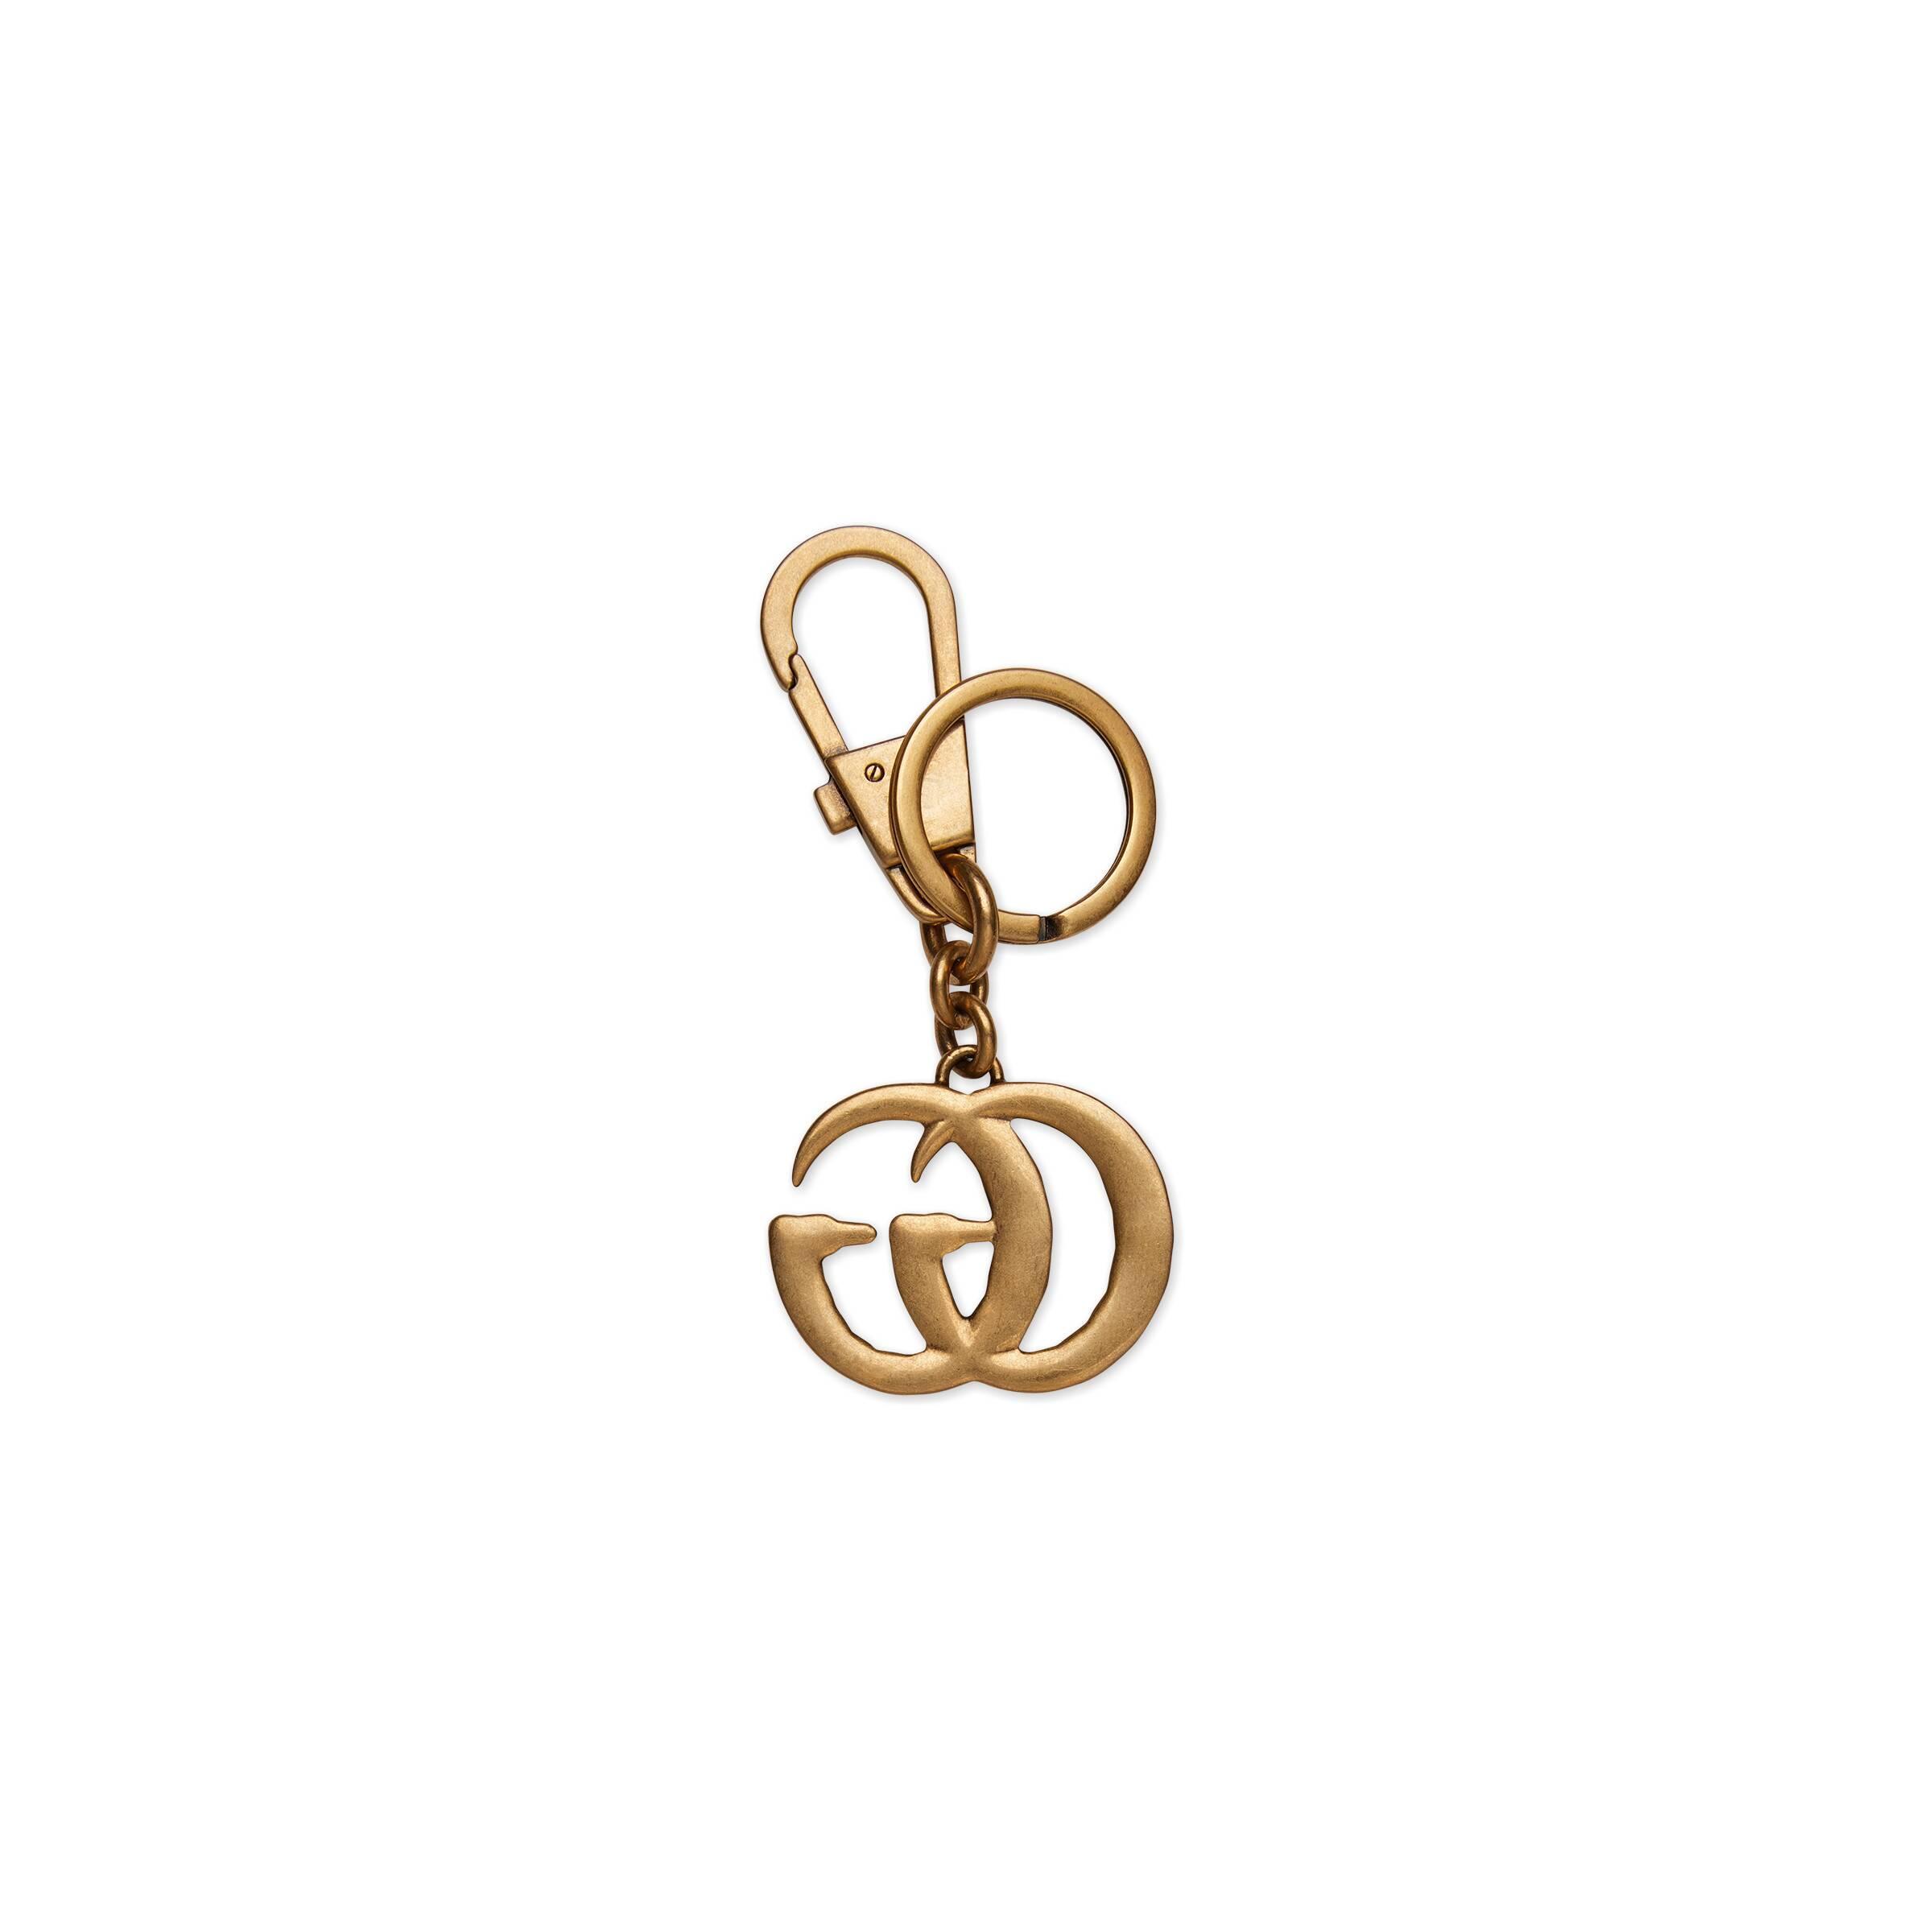 Gucci Pearl-embellished Double G Key Ring in Gold (Metallic) - Lyst